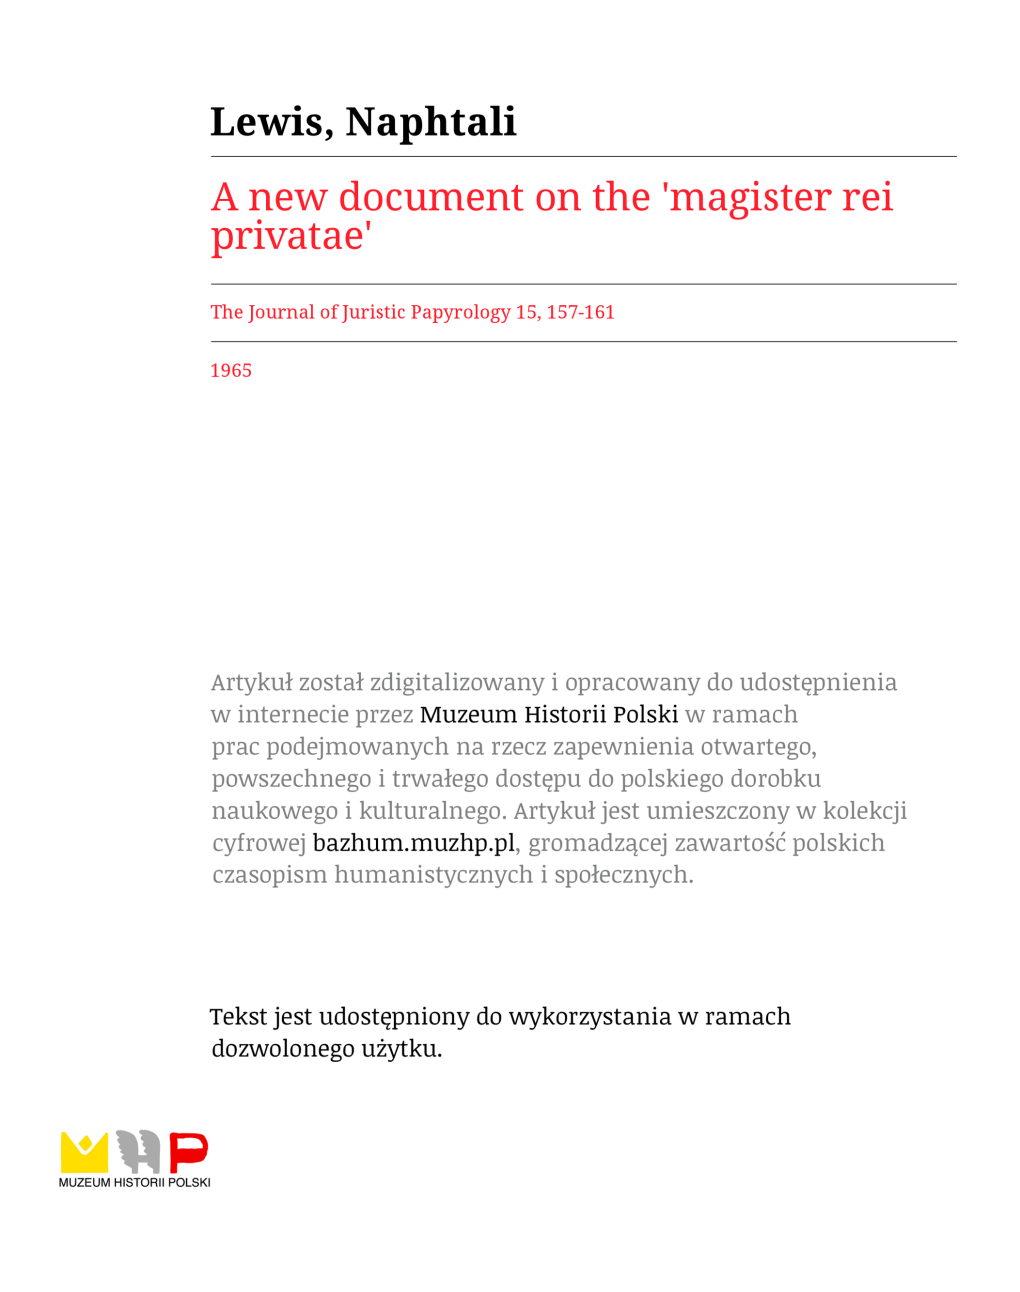 A New Document on the Magister Rei Privatae